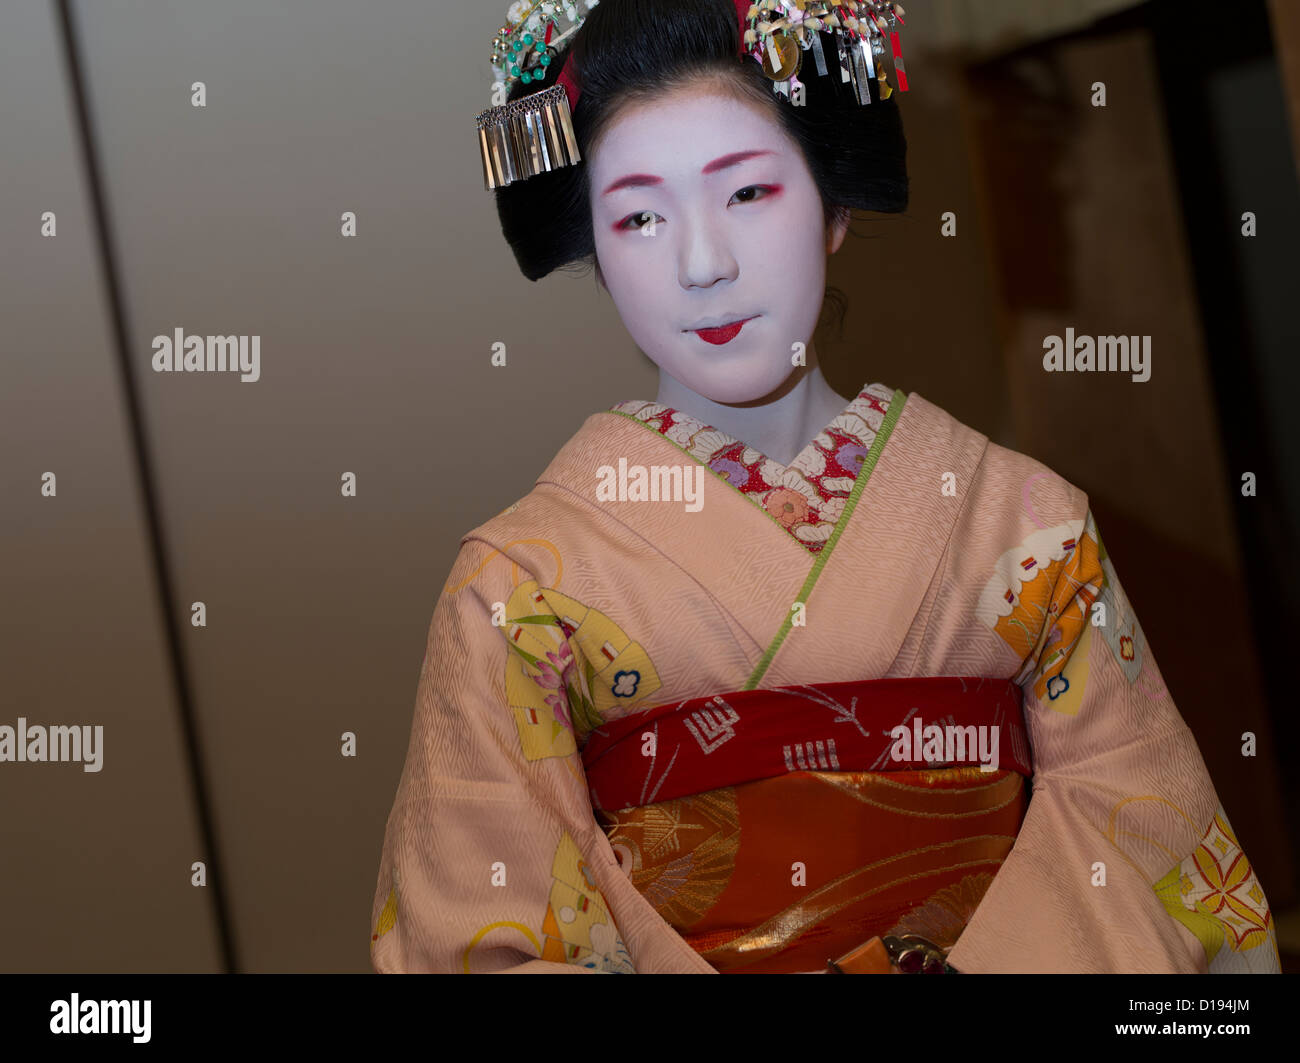 Eriha at 17 year old maiko ( trainee geisha ) entertaining guests in a Gion teahouse in Kyoto, Japan Stock Photo